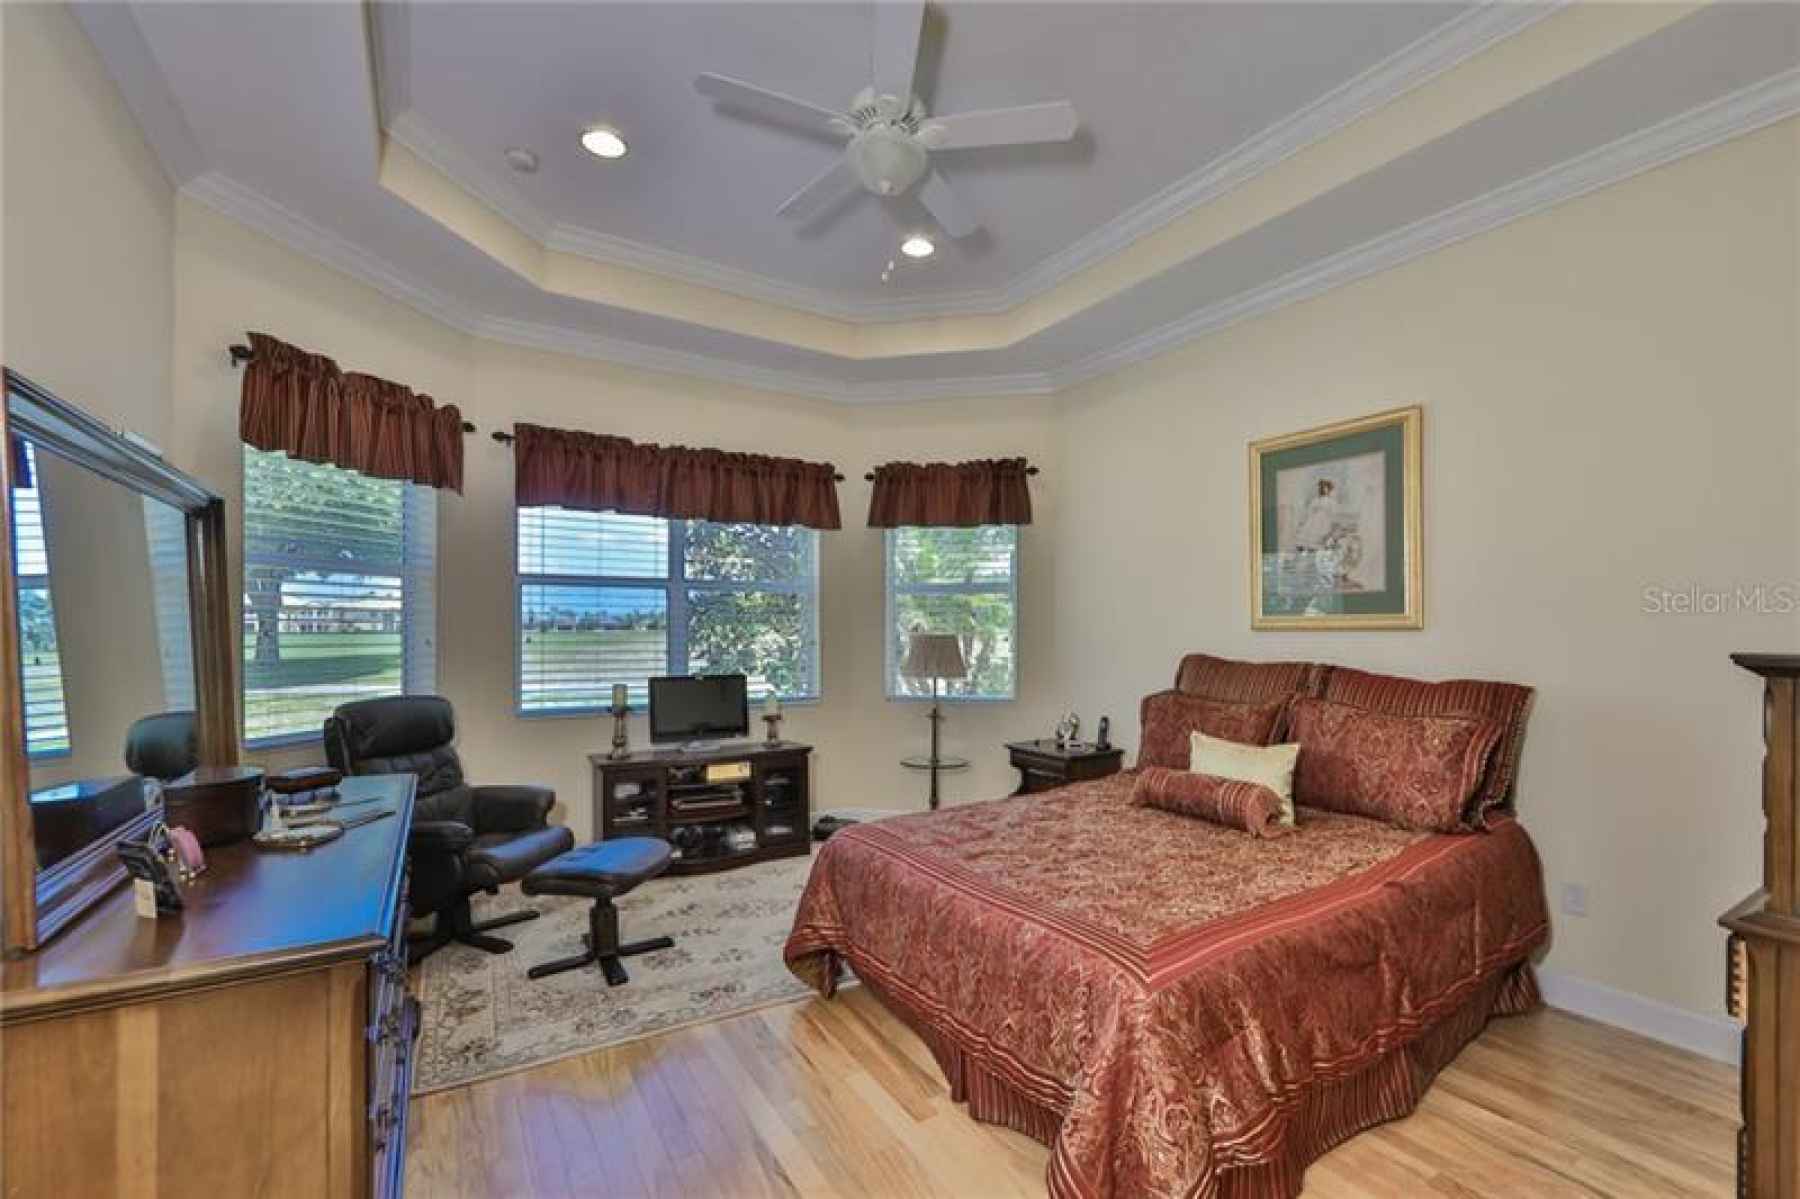 The bedroom is sumptious with the tray ceiling, crown molding, laminate flooring and large windows!